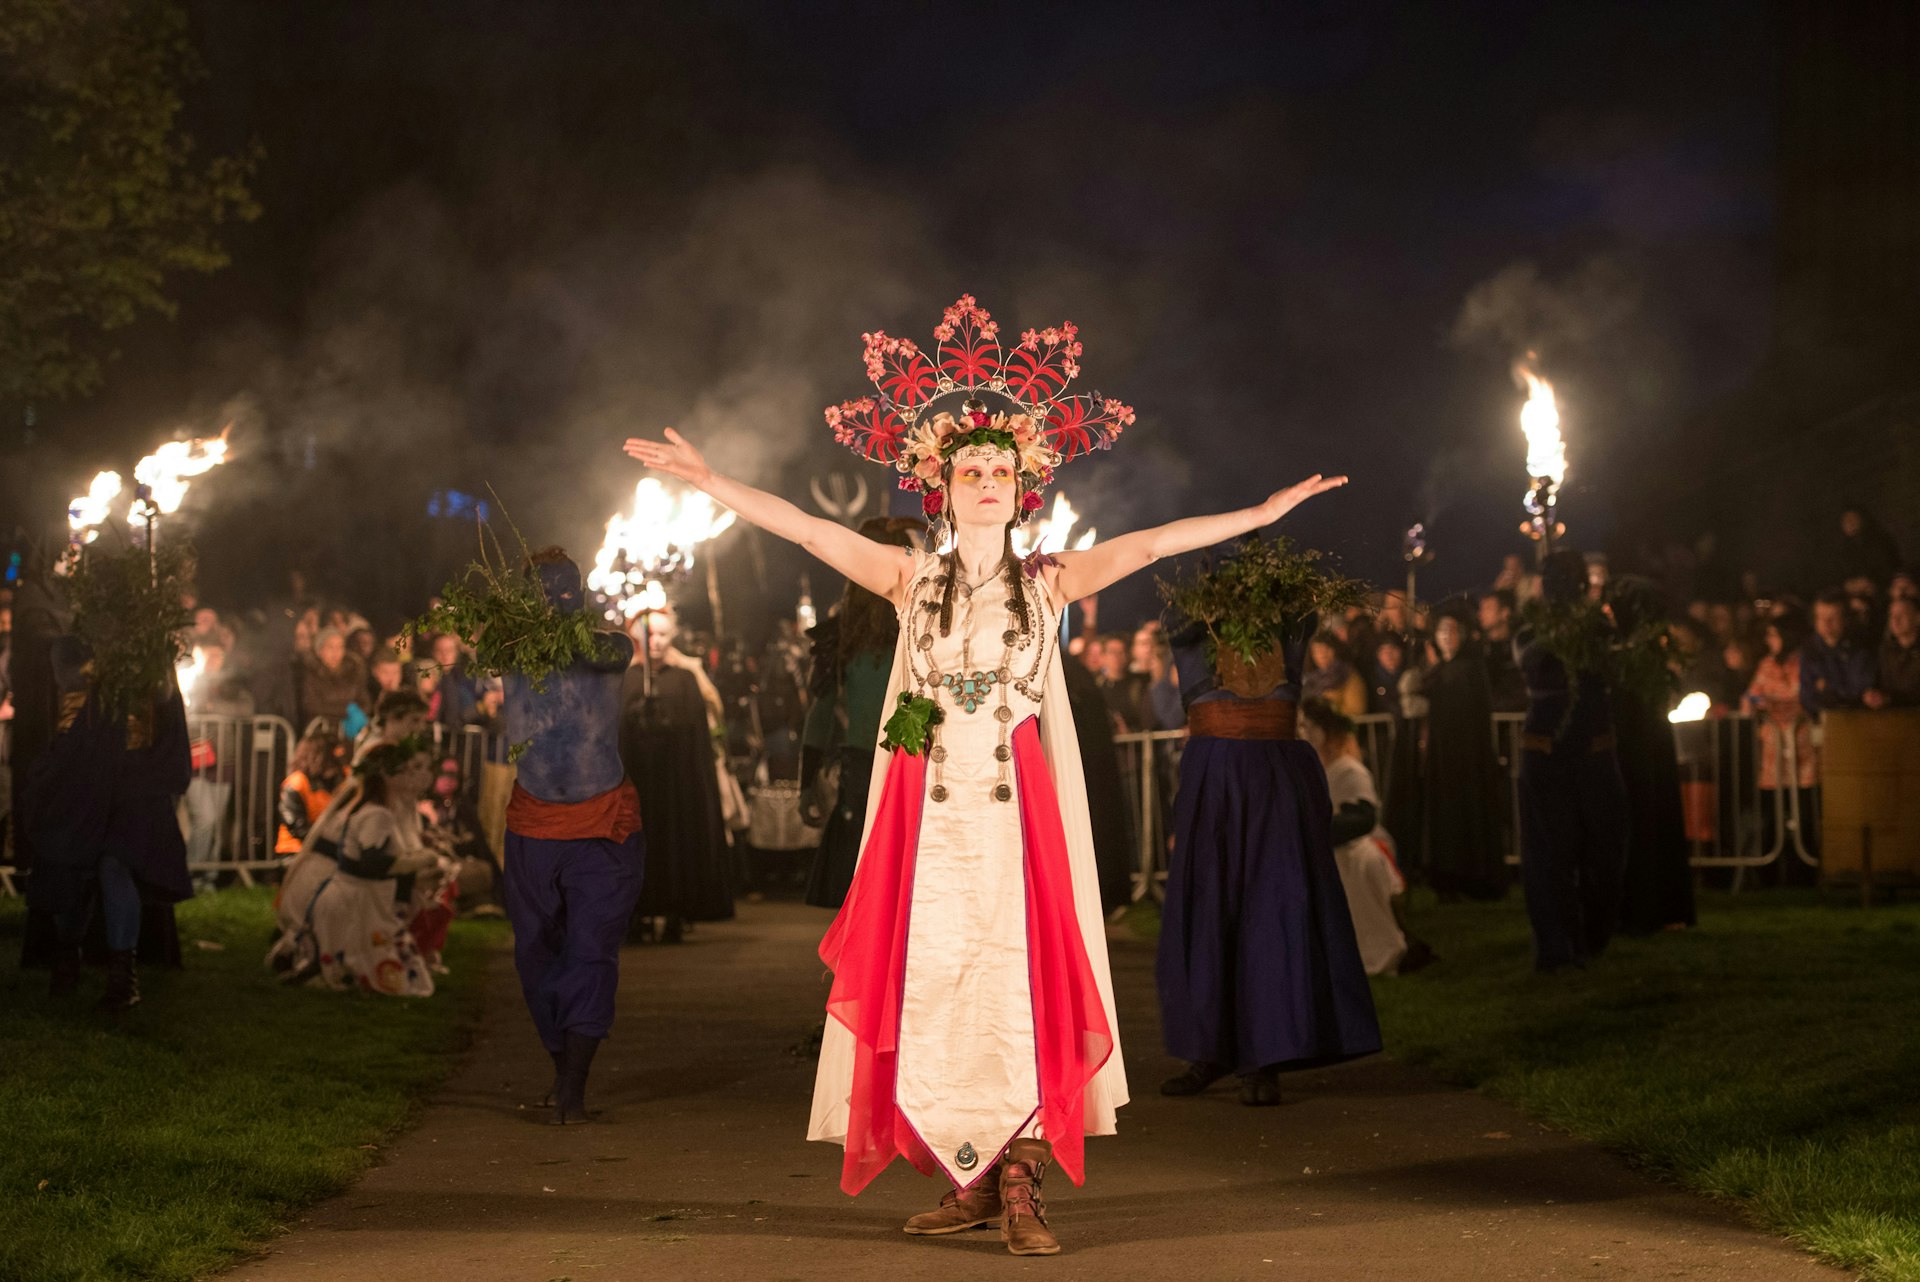 The May Queen raises her arms in greeting as she processes through the crowds at Beltane Fire Festival. She has a large headdress in the shape of red flower petals, a white dress, and red fabric hanging down in front. Behnd her large flames burn against the black night sky and people stand watching